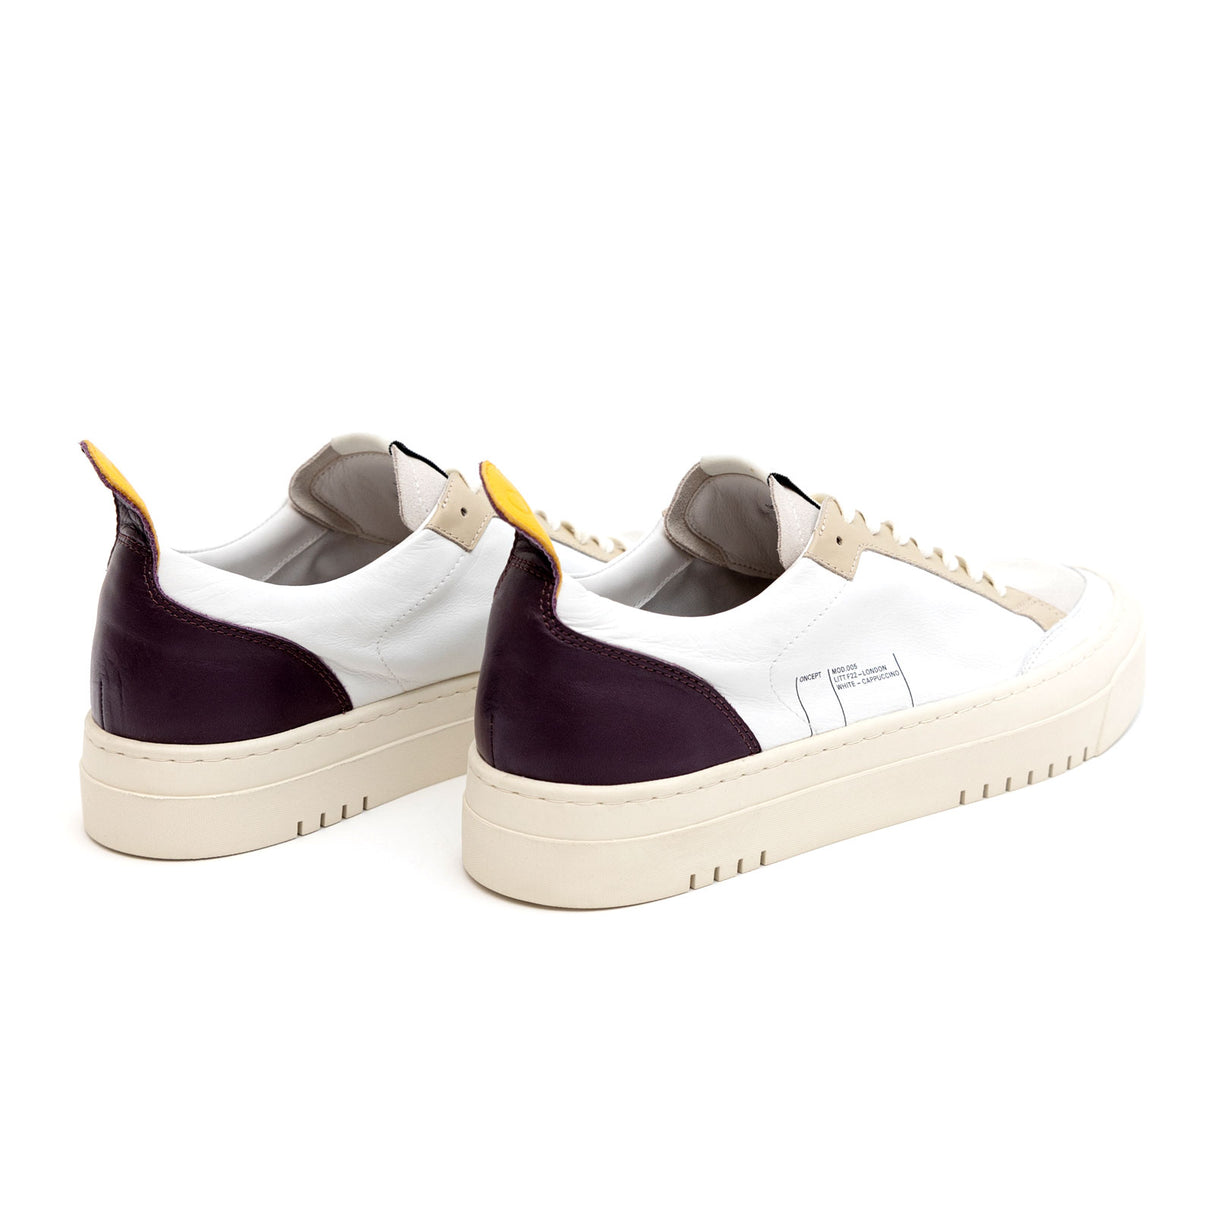 Oncept London Sneaker (Women) - White/Cappuccino Athletic - Casual - Lace Up - The Heel Shoe Fitters